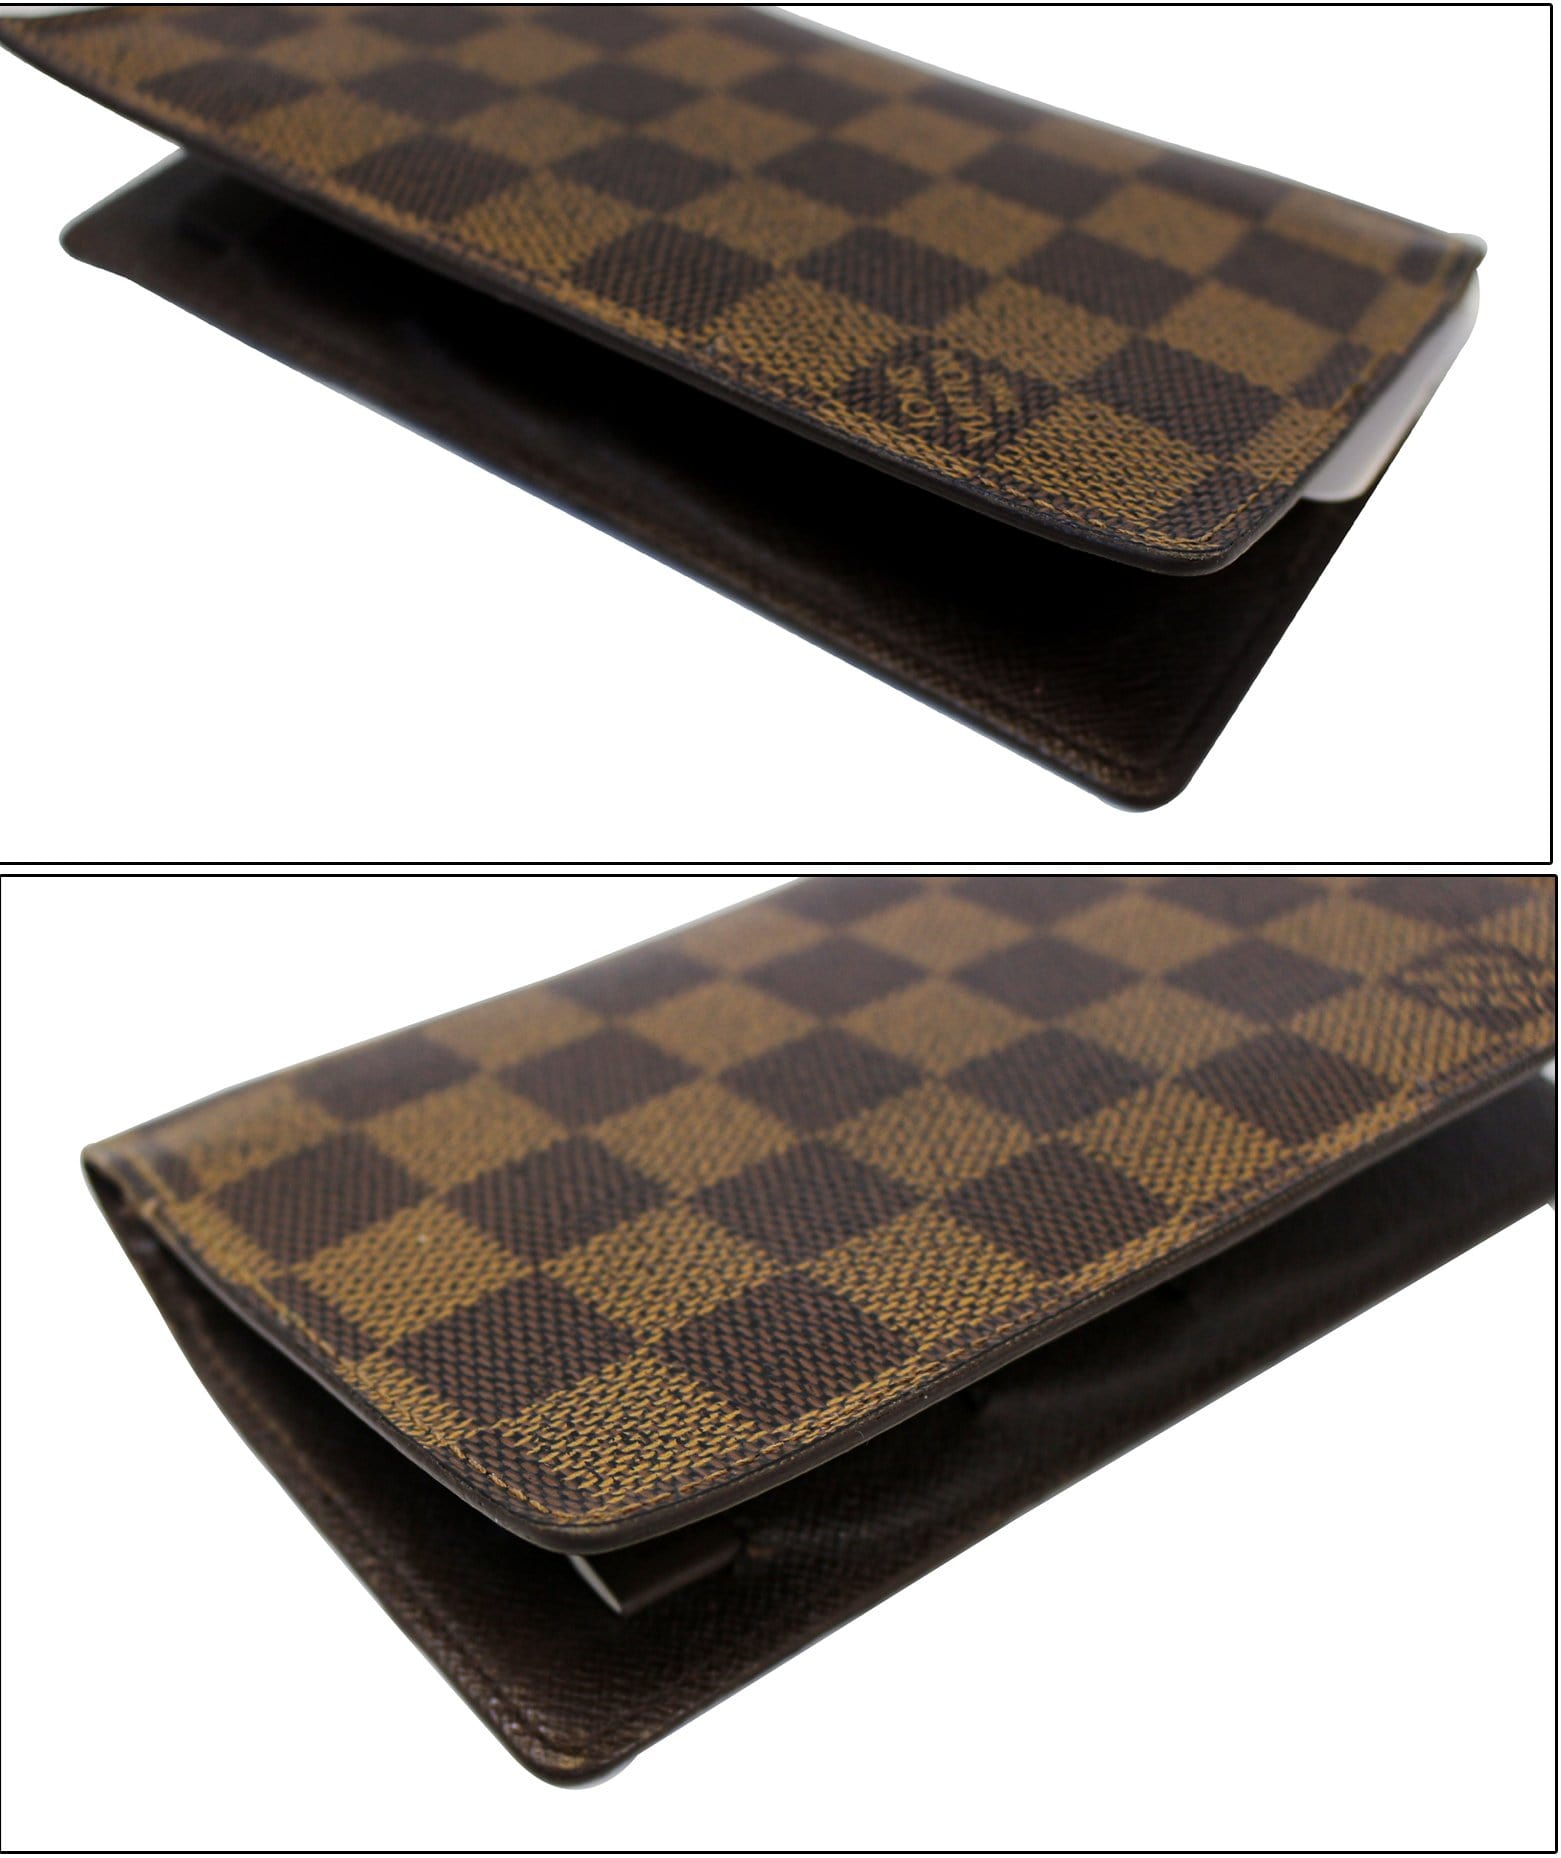 LOUIS VUITTON - Card wallet in ebony checkered coated ca…